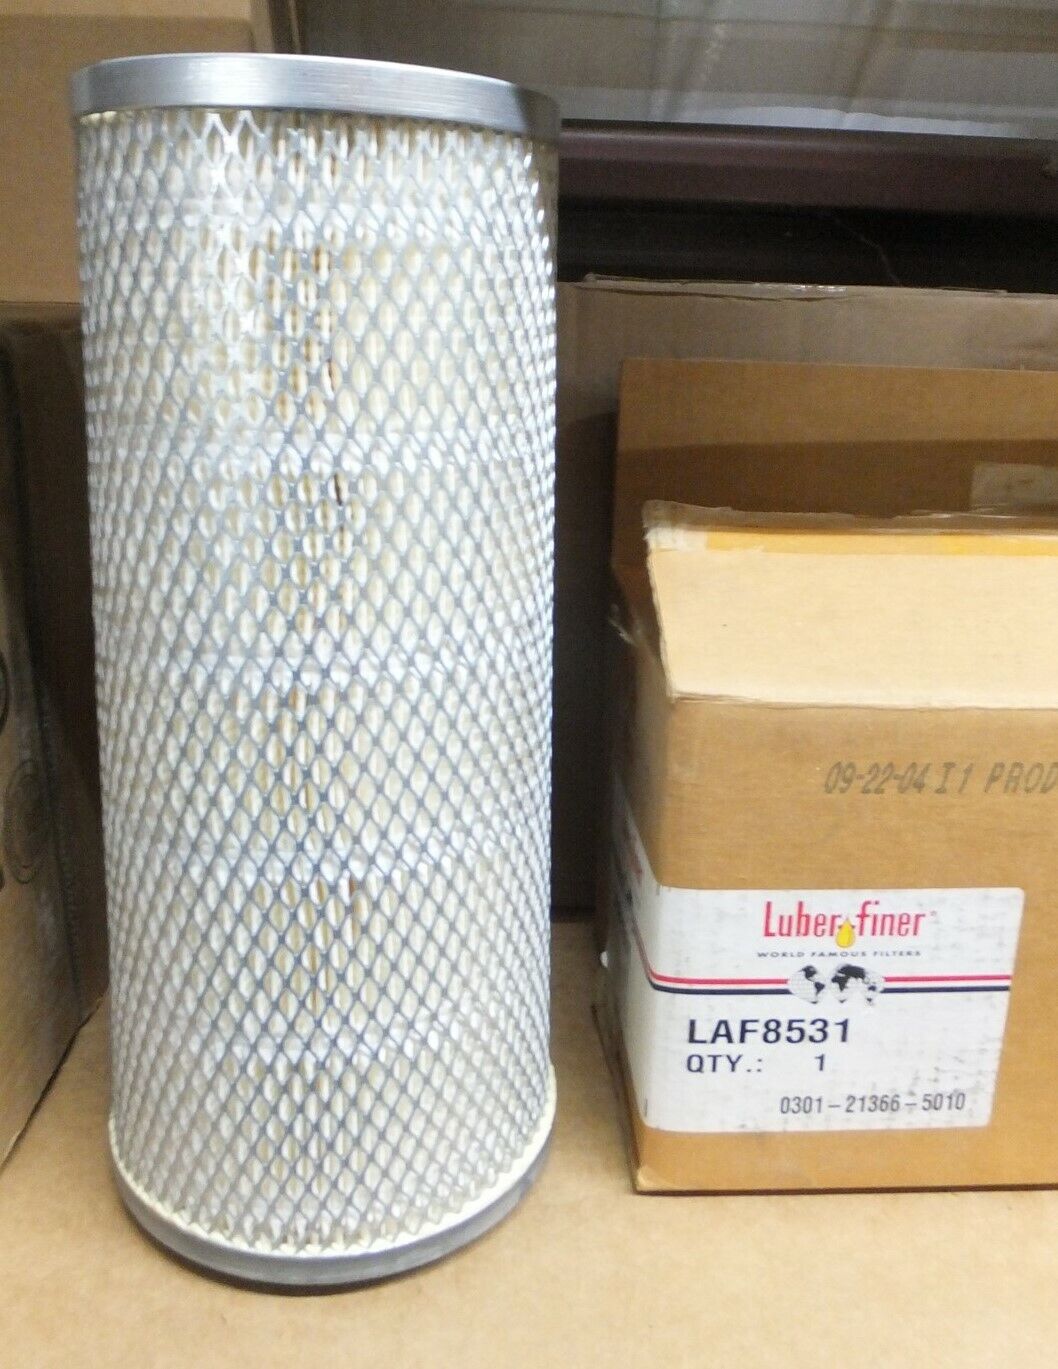 LAF8531 NEW LUBERFINER FILTER